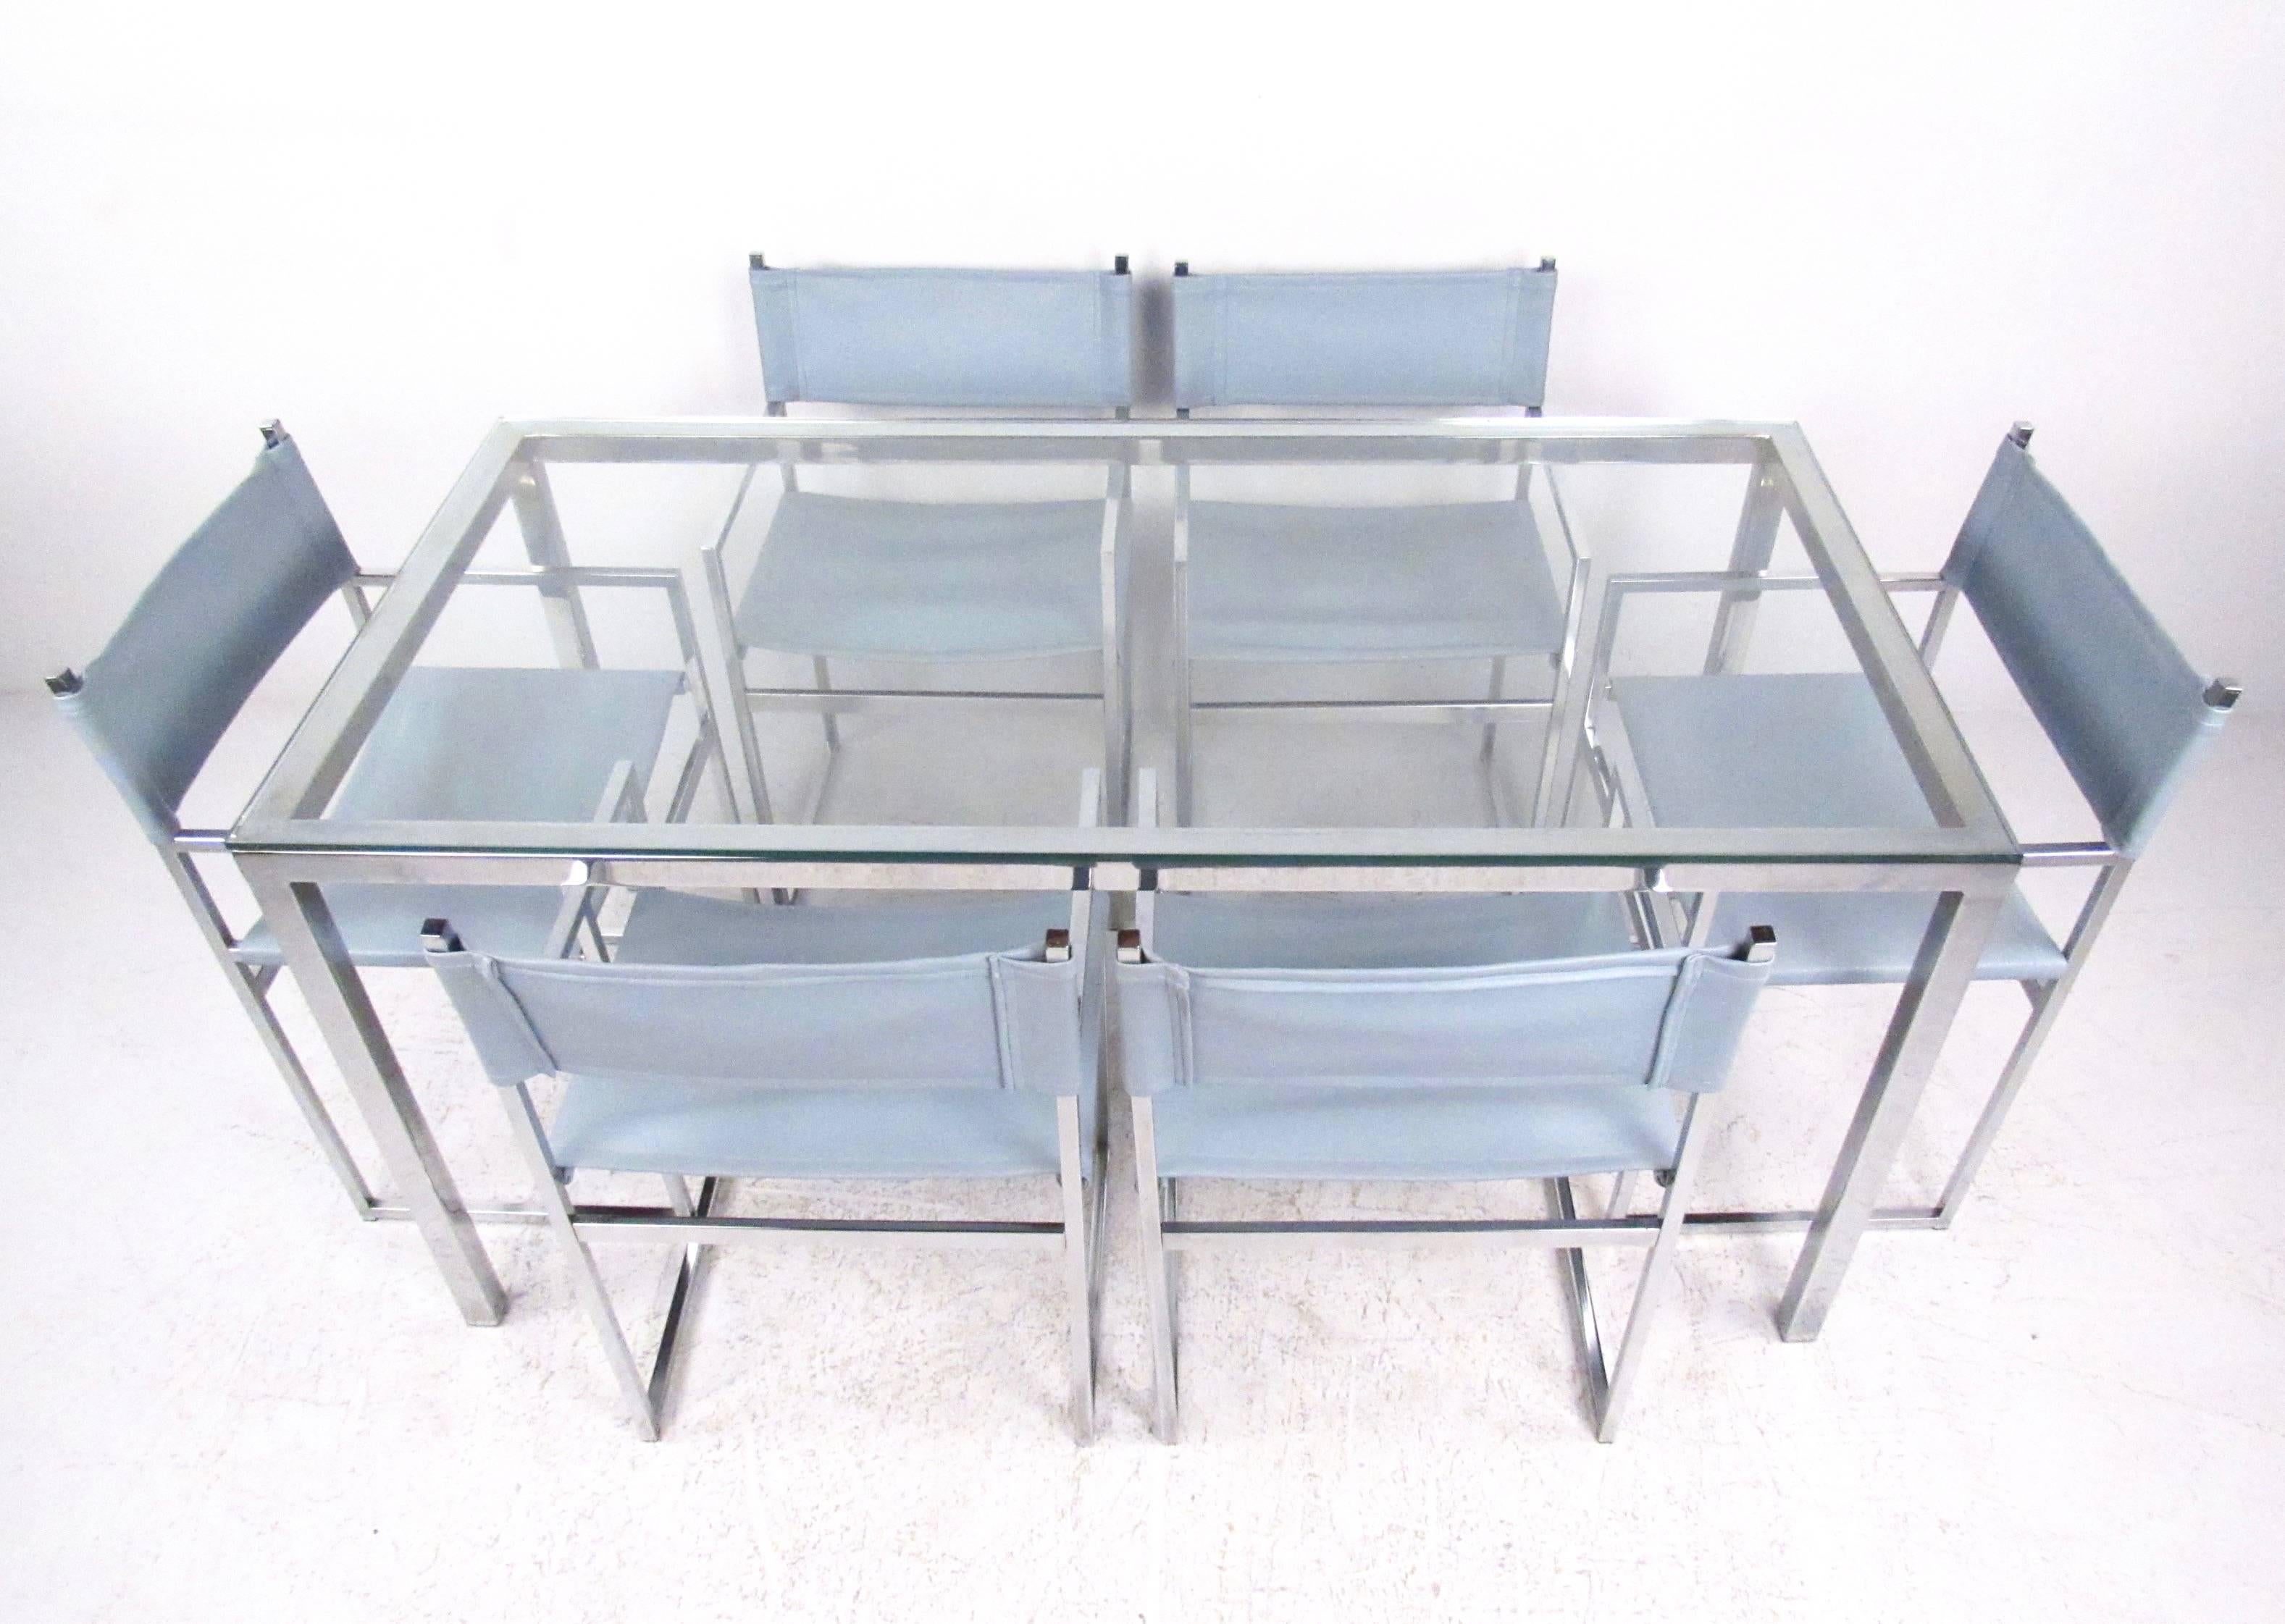 This stylish vintage chrome dining set includes six matching Stendig style chairs with matching chrome frame dining table. Making a beautiful mid-century modern statement in any setting, this glass top table makes a spacious eating or meeting space